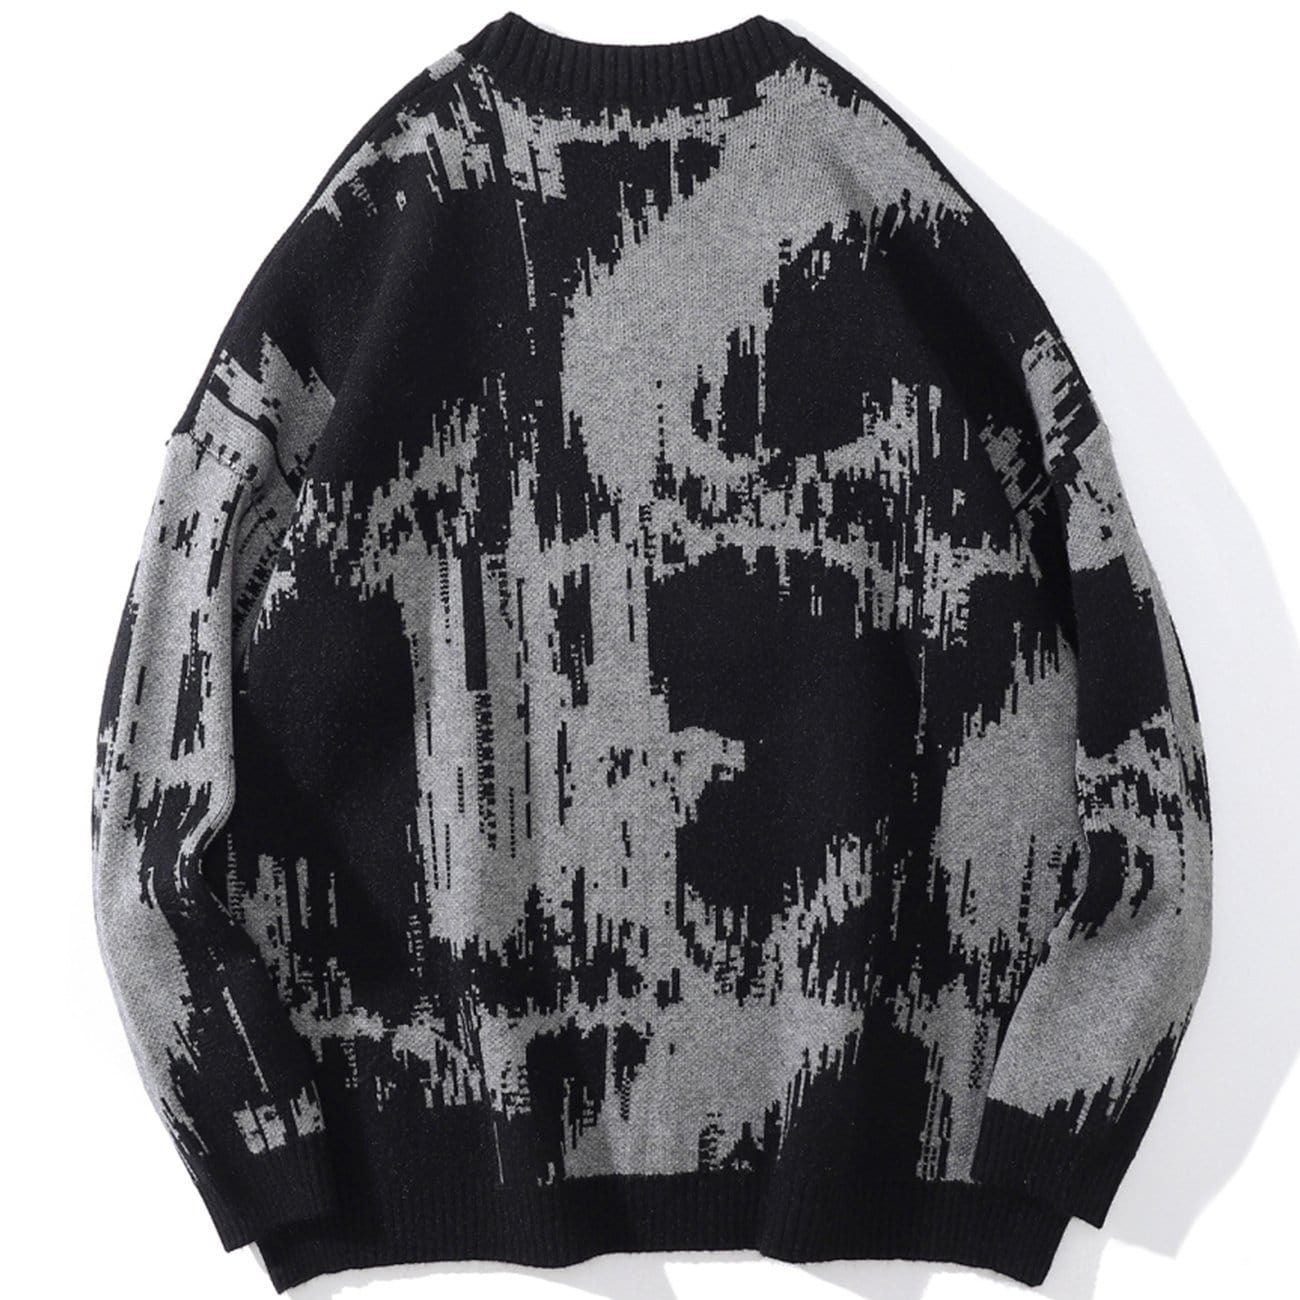 TO Tie Dye Embroidery Knitted Sweater